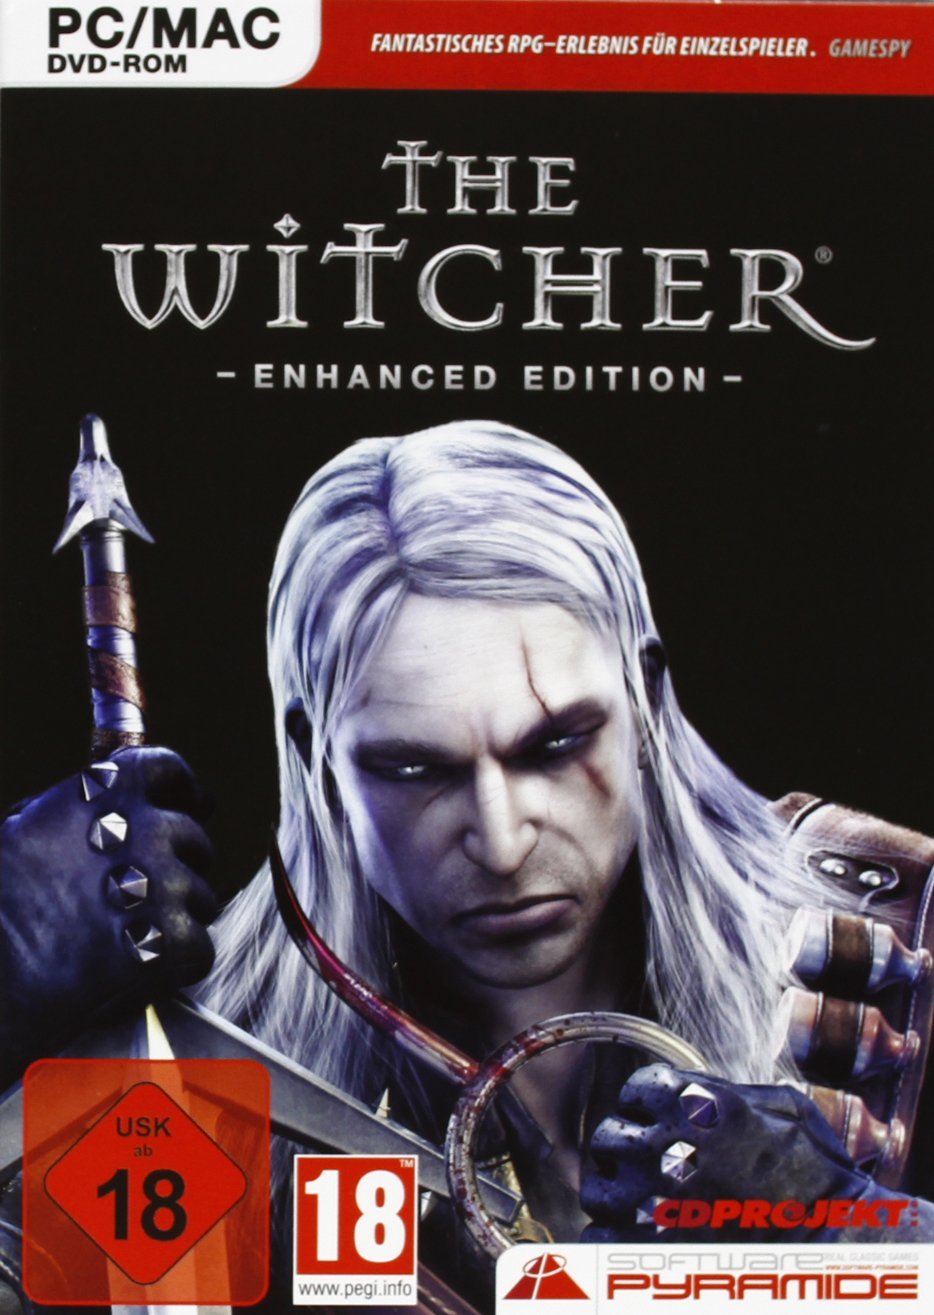 The Witcher - Enhanced Edition